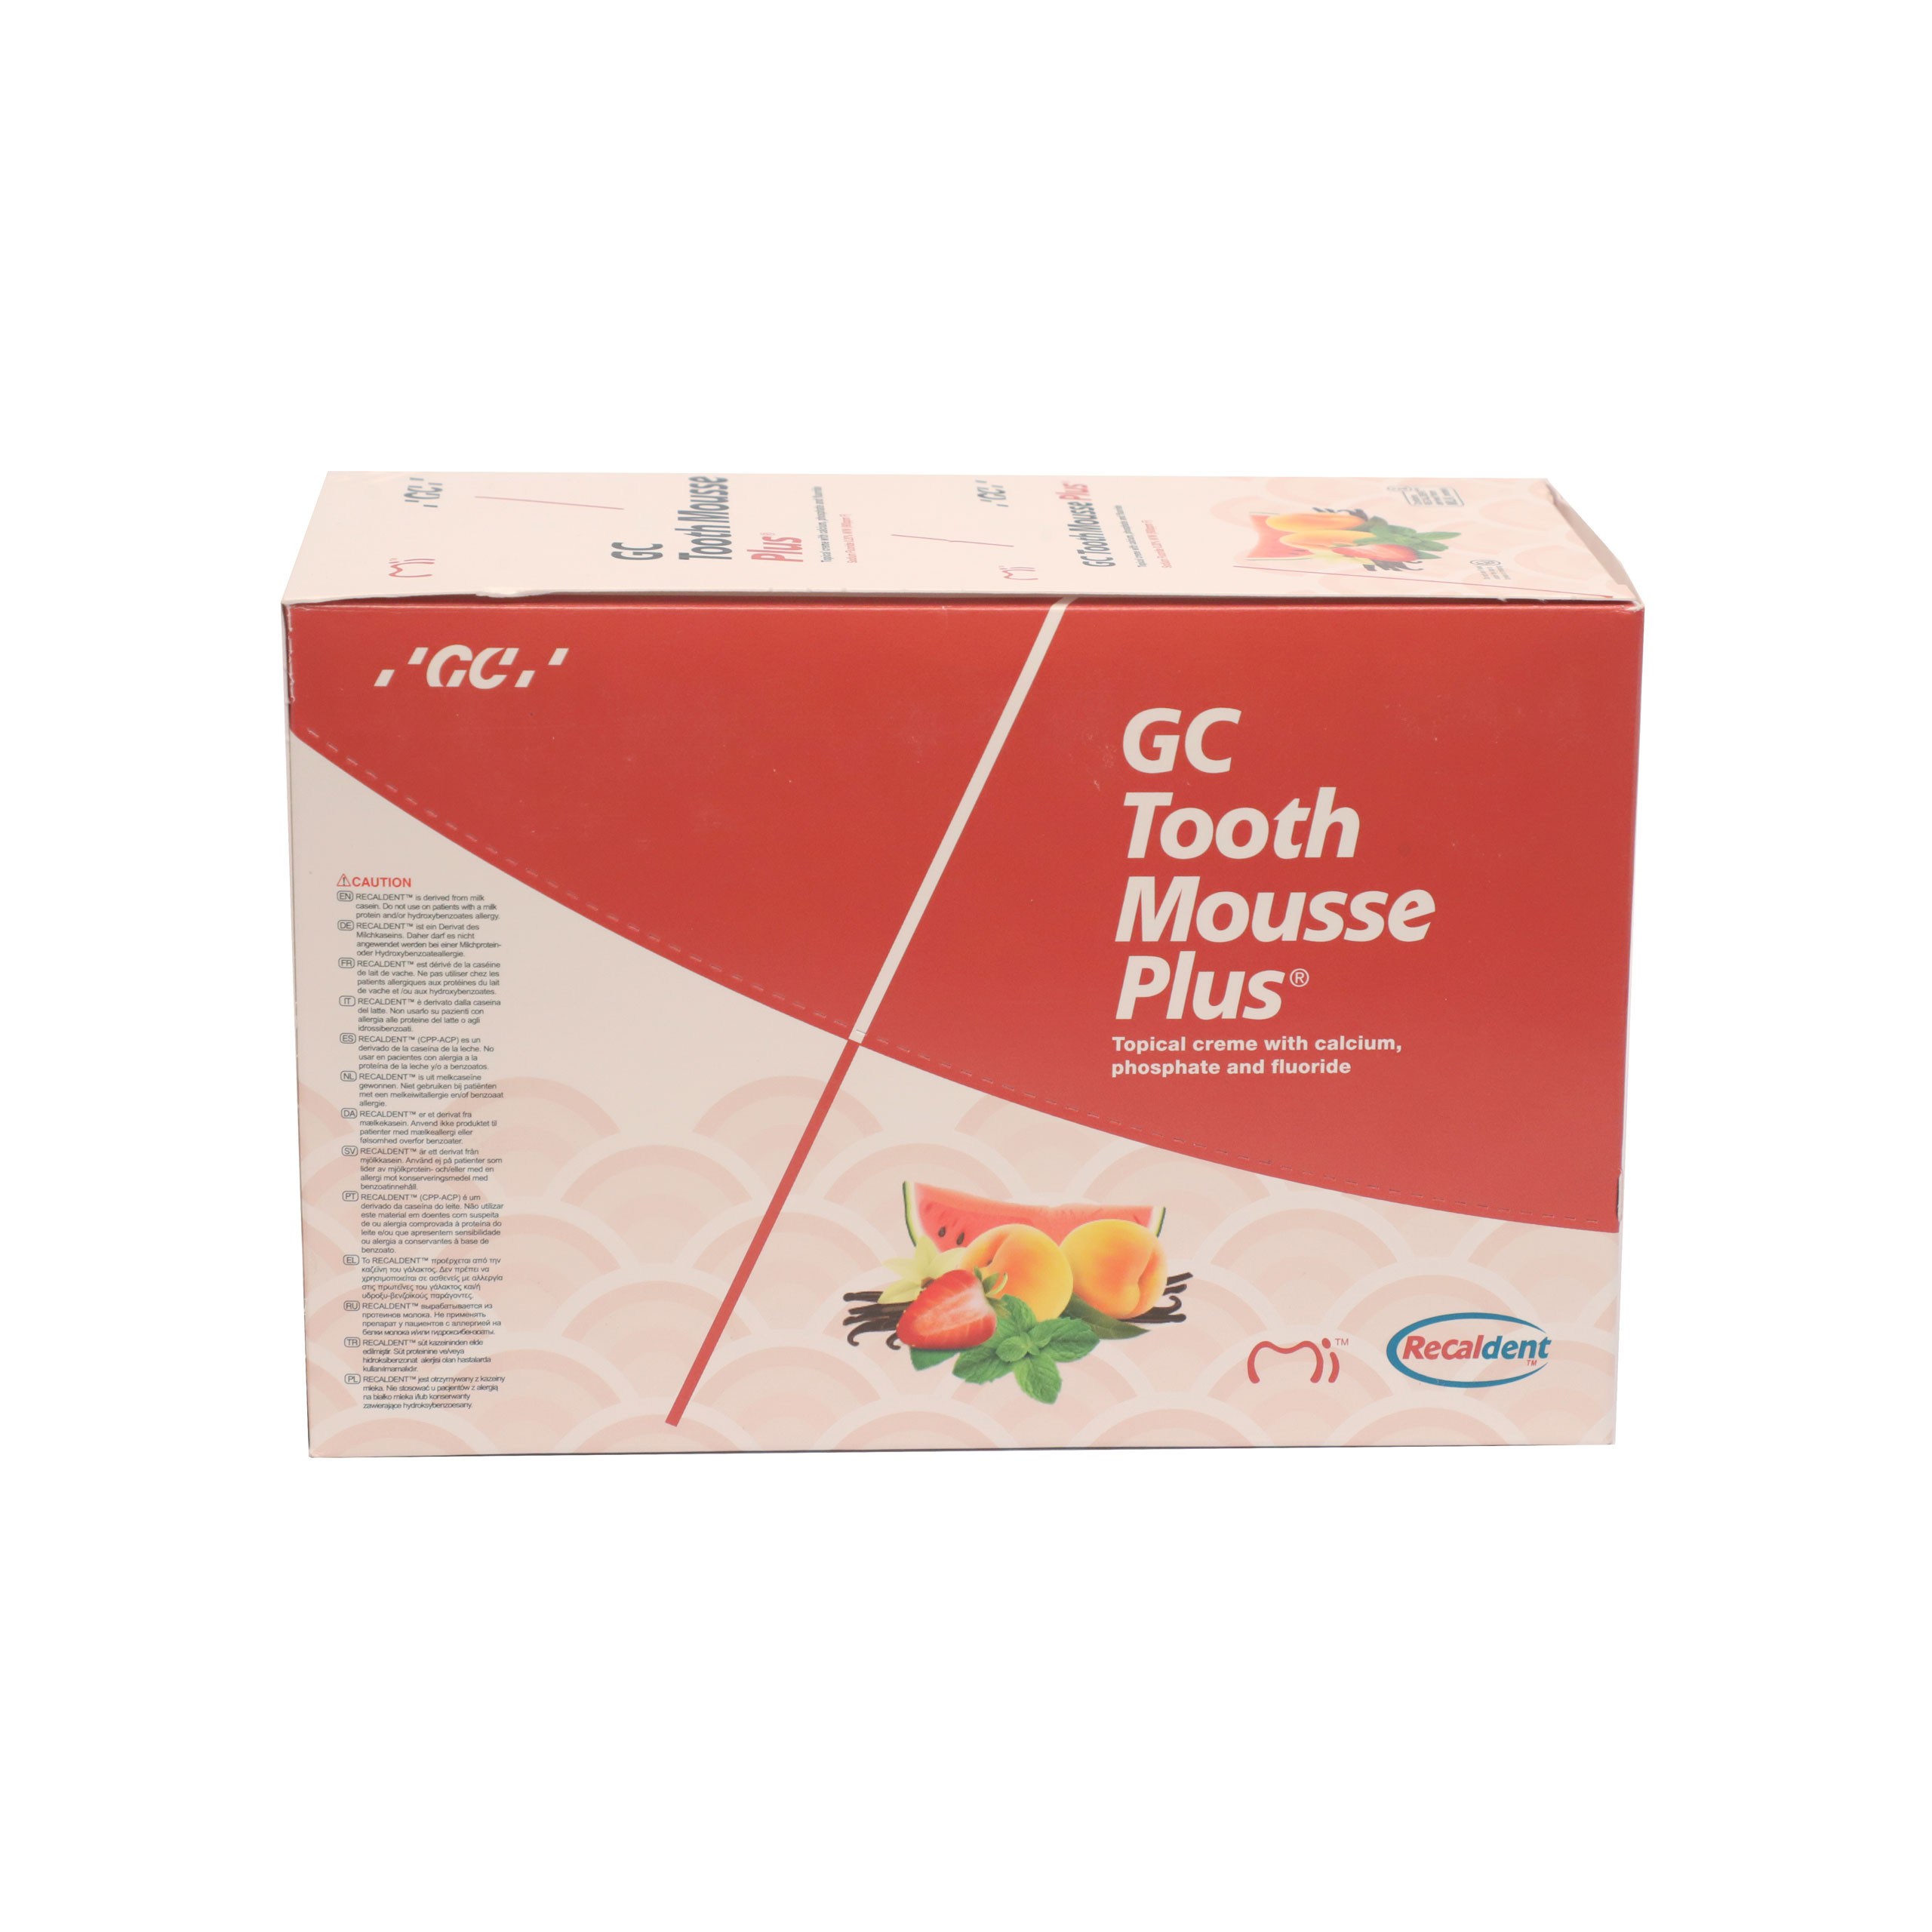 GC Tooth Mousse Plus - Assortment Pack Of 10